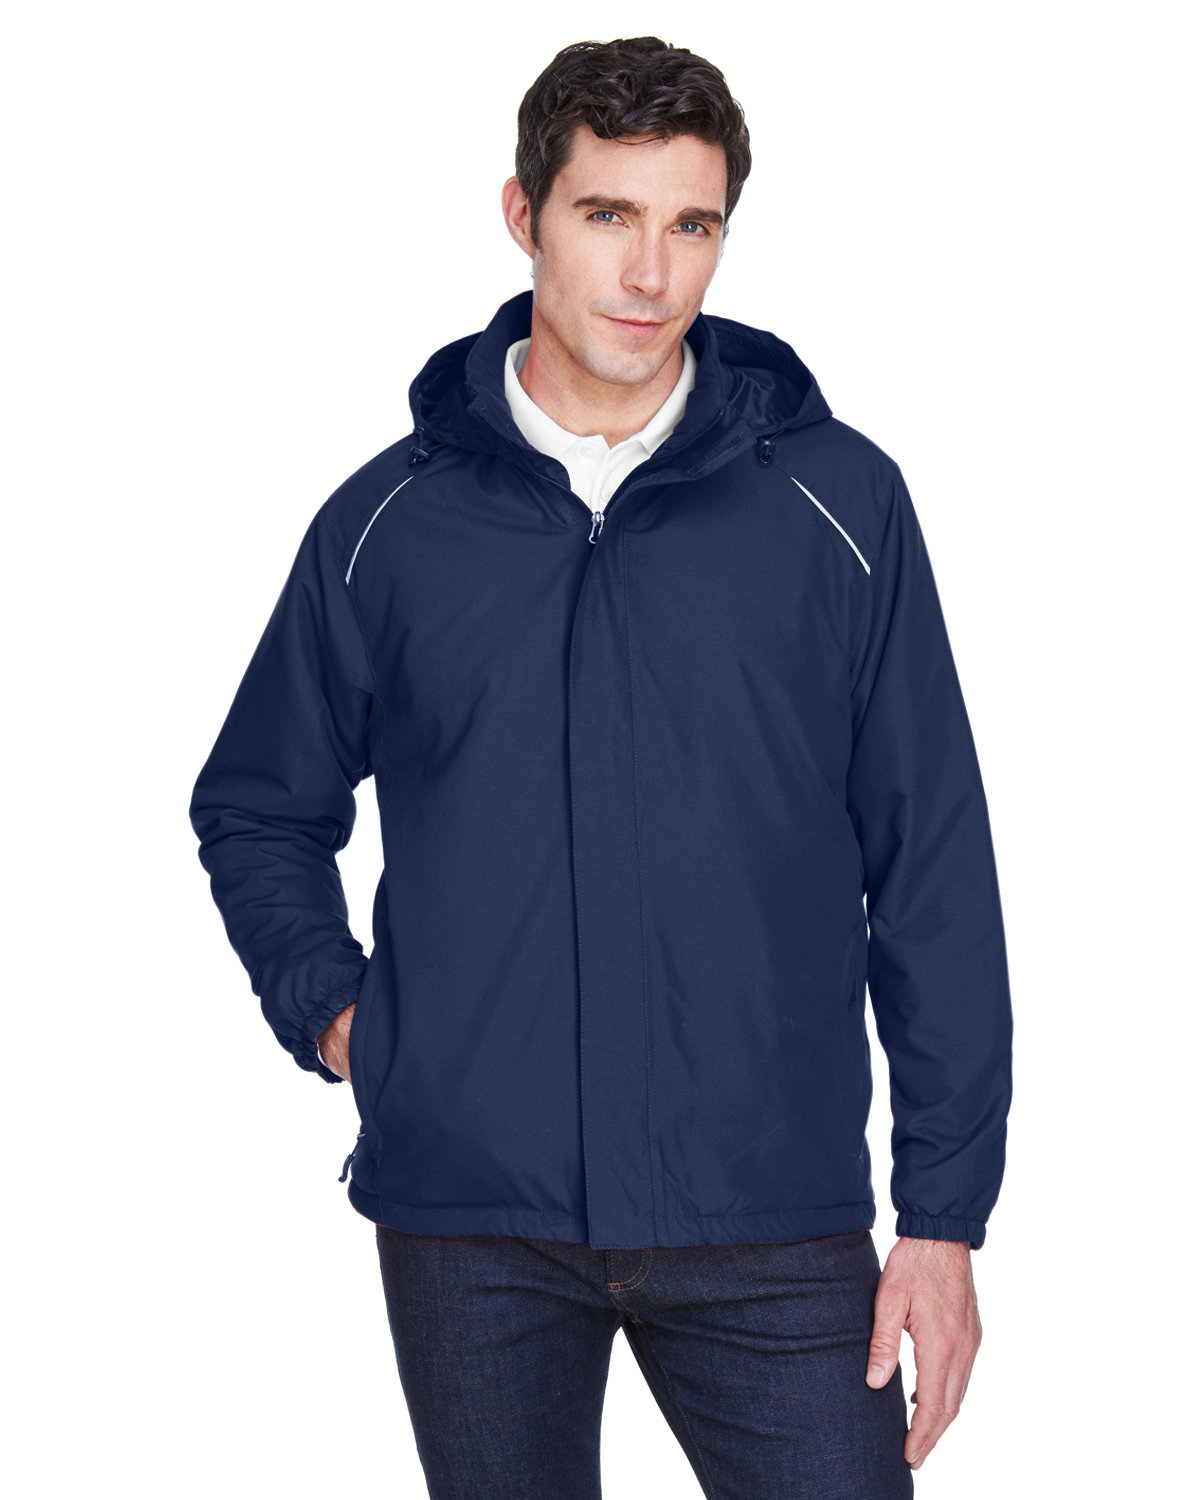 Core 365 Men's Tall Brisk Insulated Jacket | alphabroder Canada